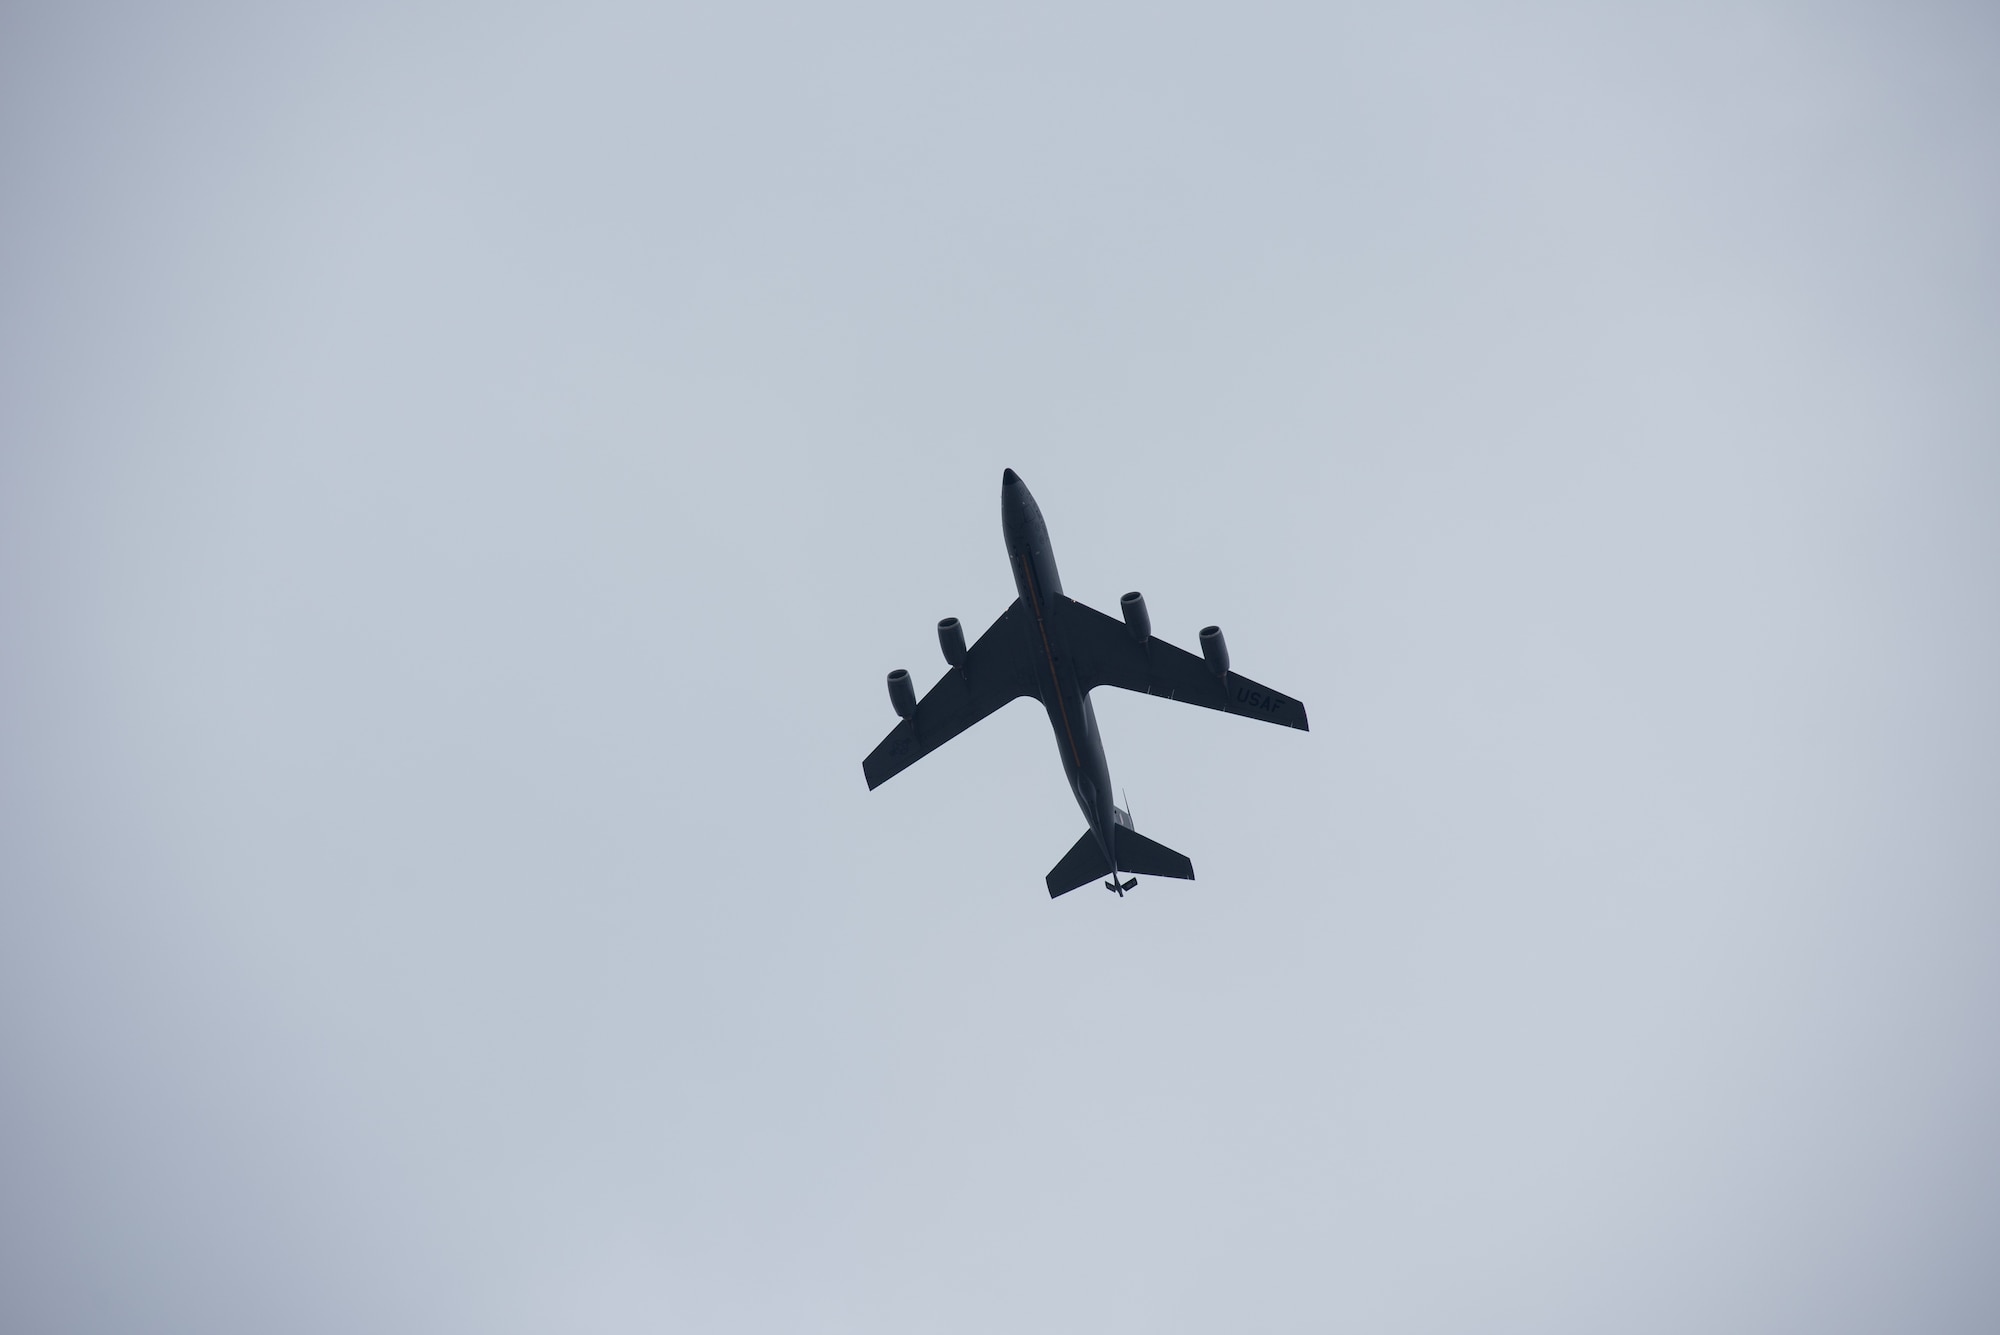 A KC-135 Stratotanker soars above McConnell Air Force Base, Kan, Dec. 18, 2018. The KC-135 has been refueling U.S. Air Force and ally aircraft for more than 62 years, enabling rapid global reach. (U.S. Air Force photo by Staff Sgt. Chris Thornbury)